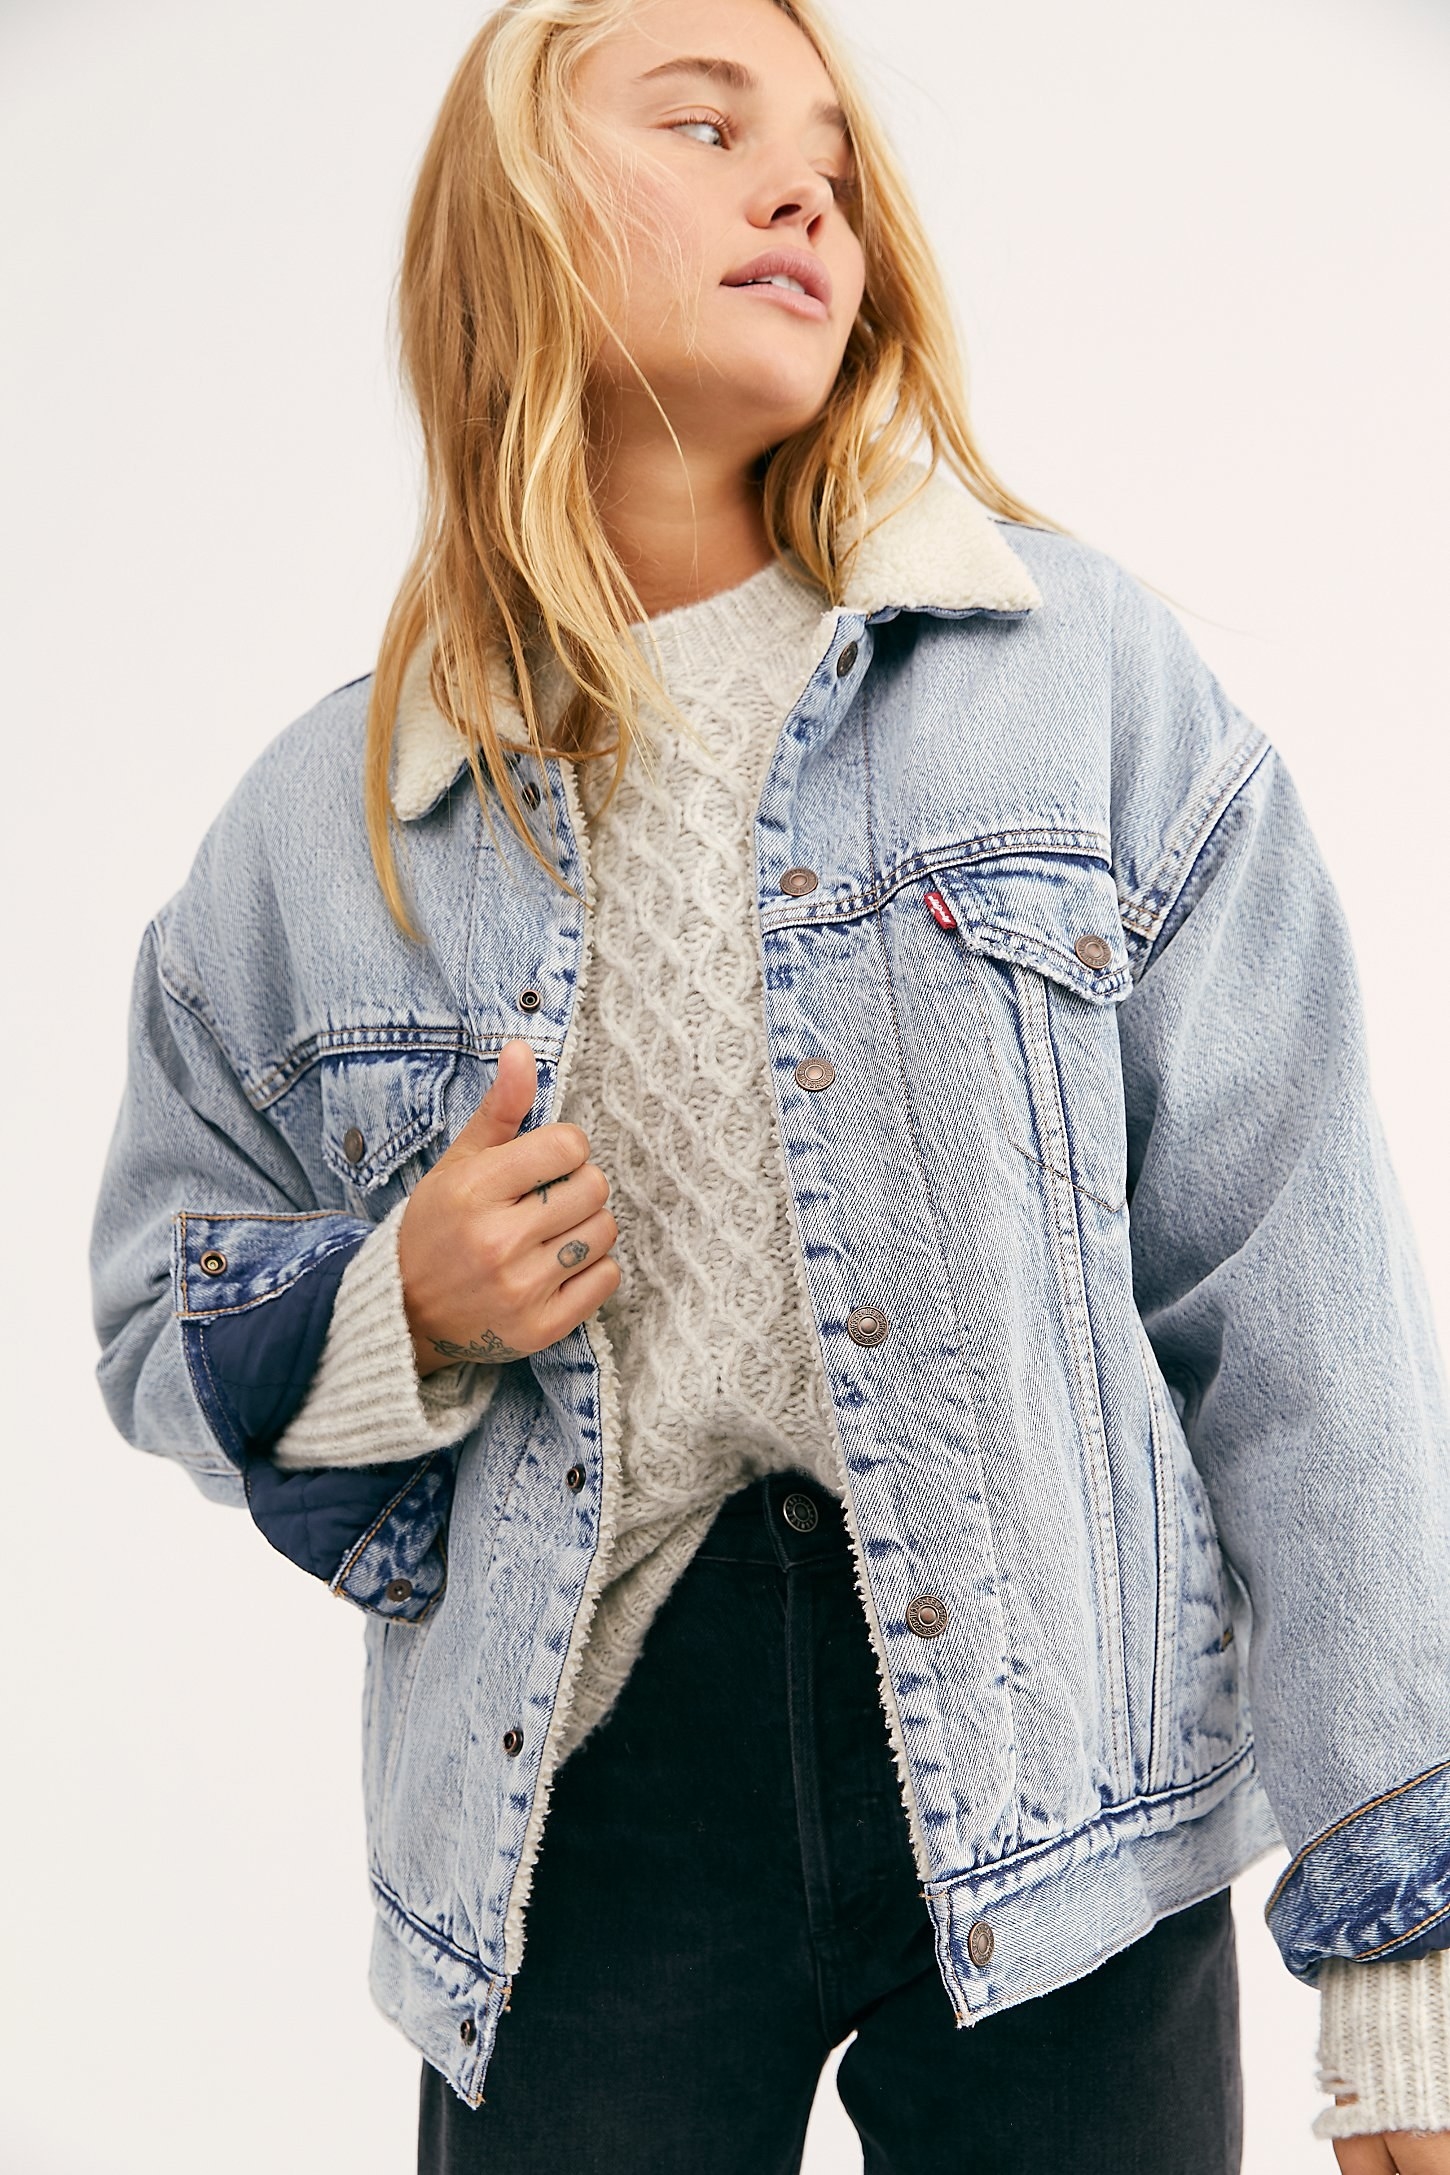 42 Pieces Of Fall Clothing You'll Basically Want To Wear Nonstop